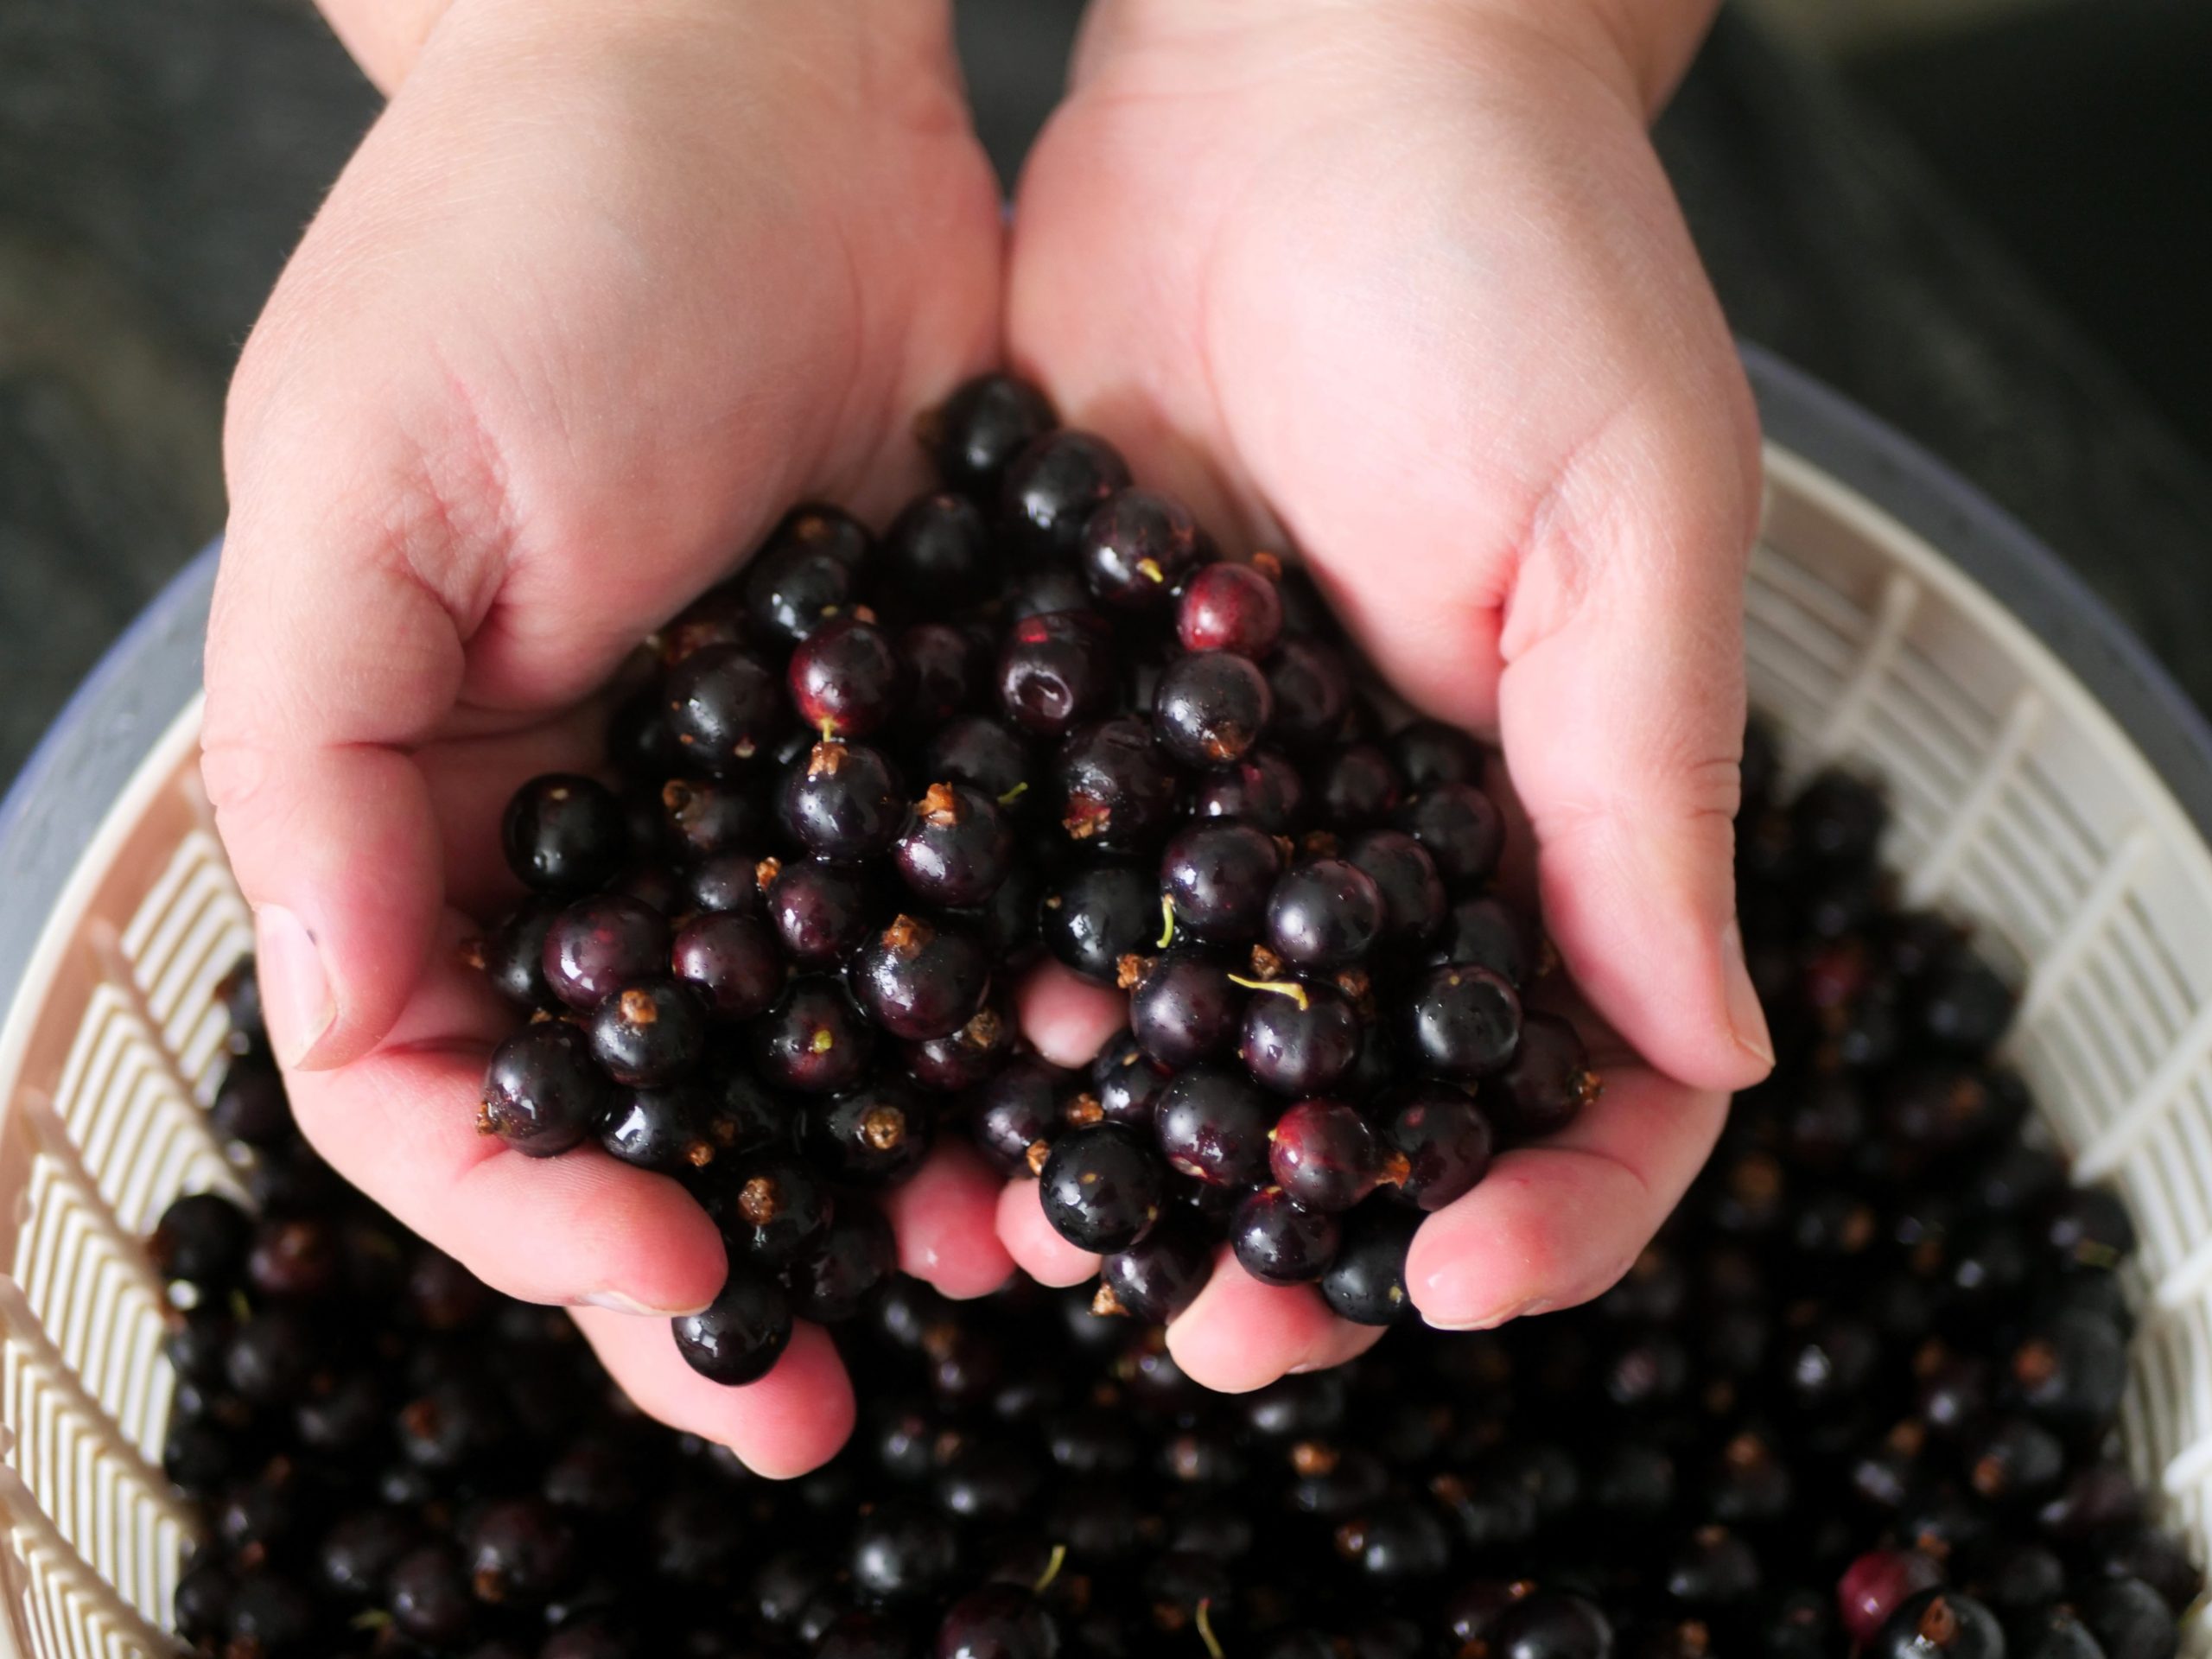 How To Make And Preserve Blackcurrant Syrup At Home